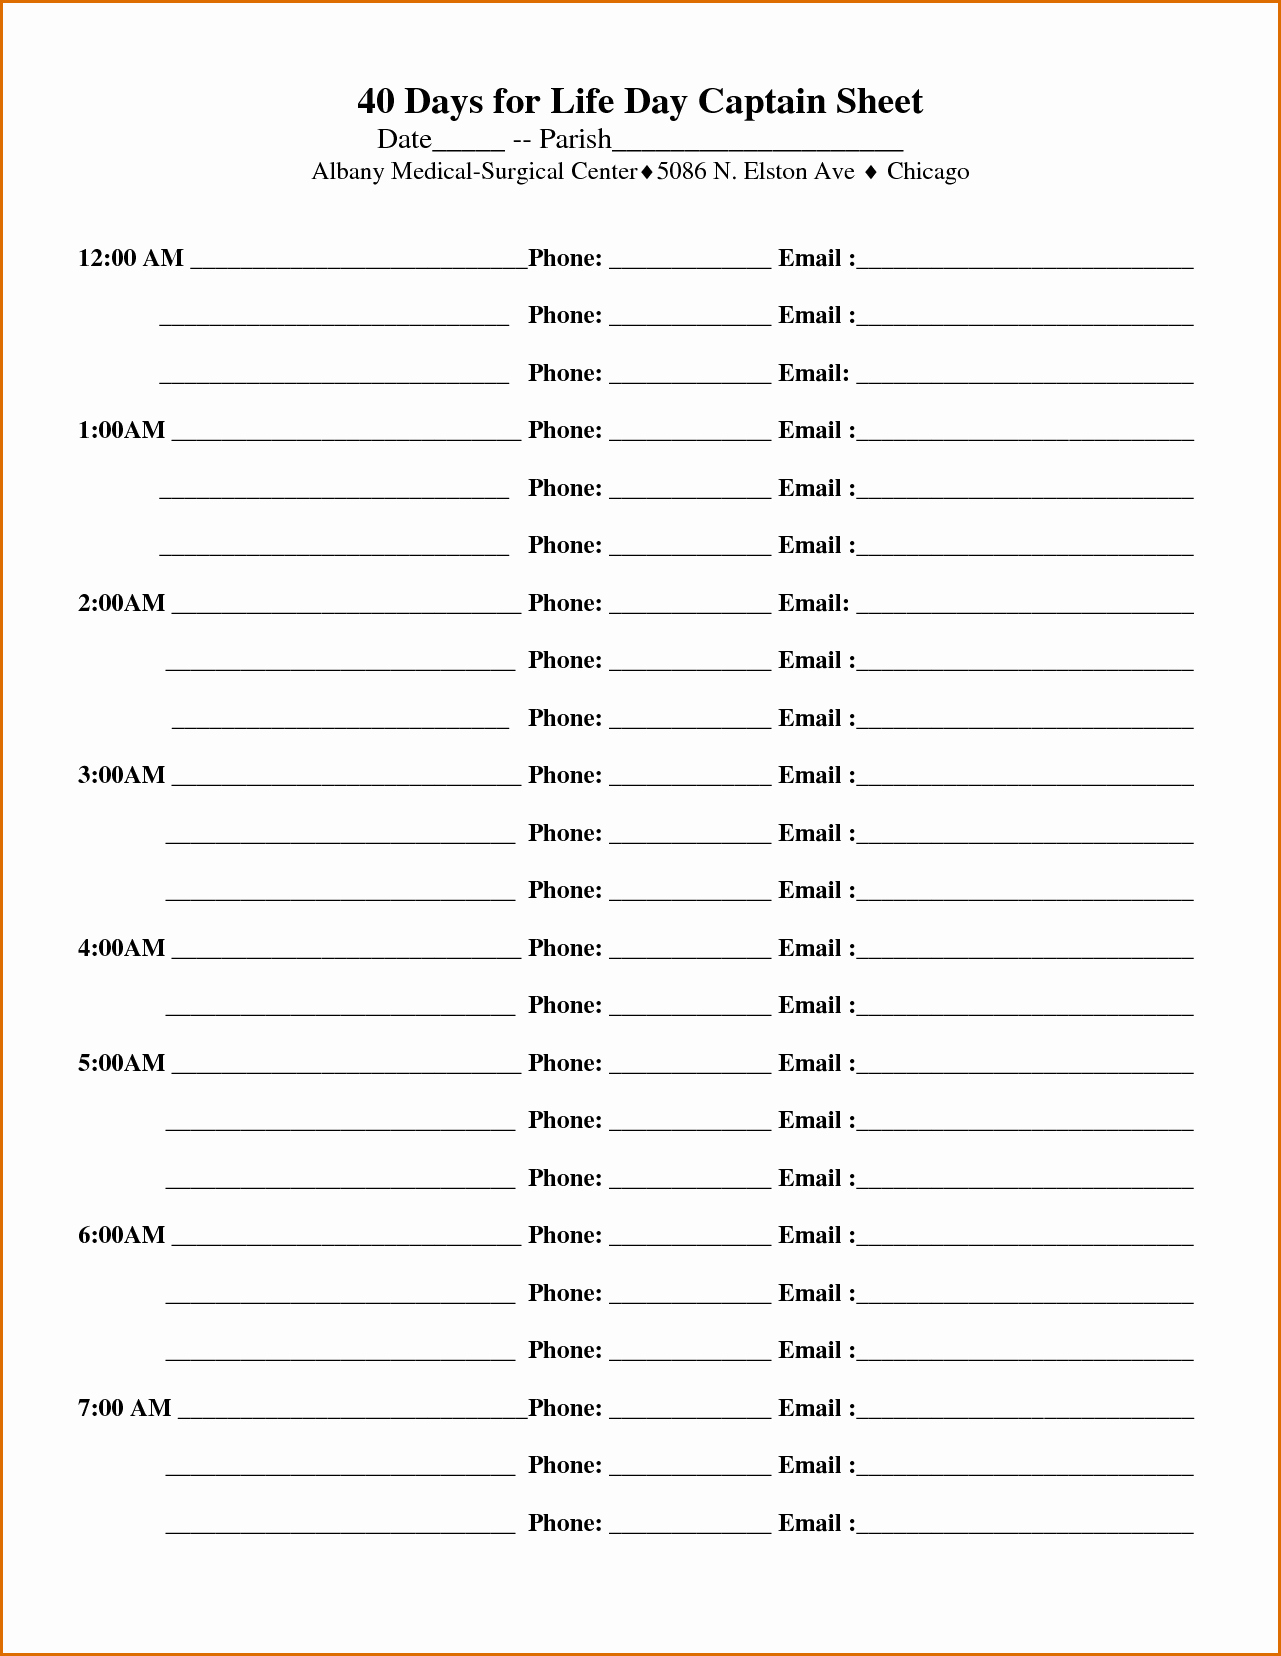 Volunteer Sign Up form Template Awesome 10 Volunteer Sign Up Sheet Template